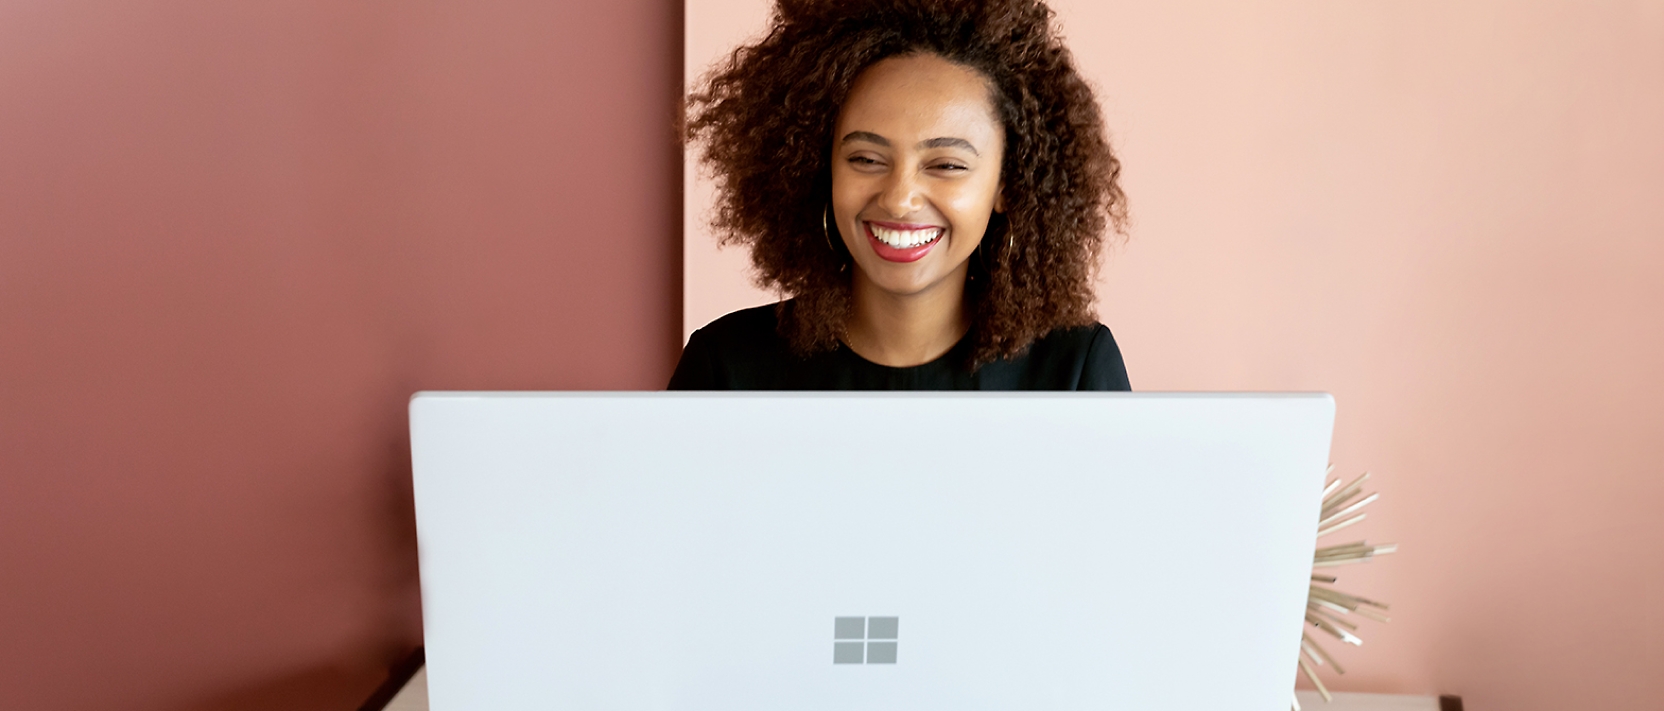 A woman is smiling while working on a laptop.